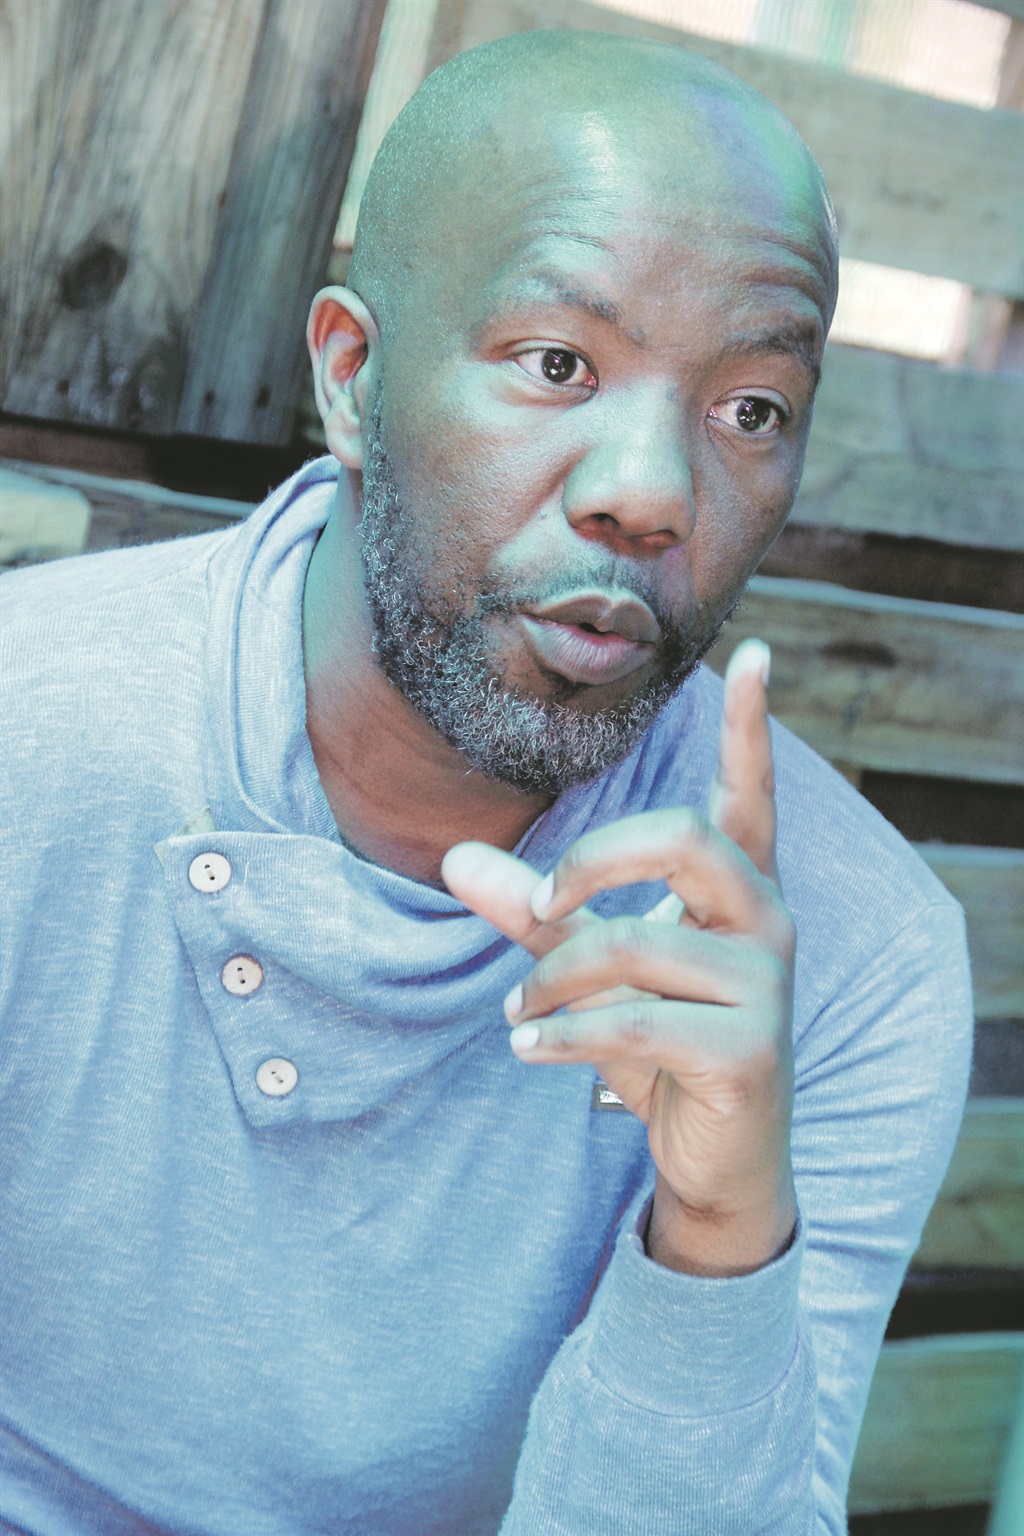 Actor and presenter Mlami Mangcala says people in the arts should always have a plan B. Photo: Lindile Mbontsi